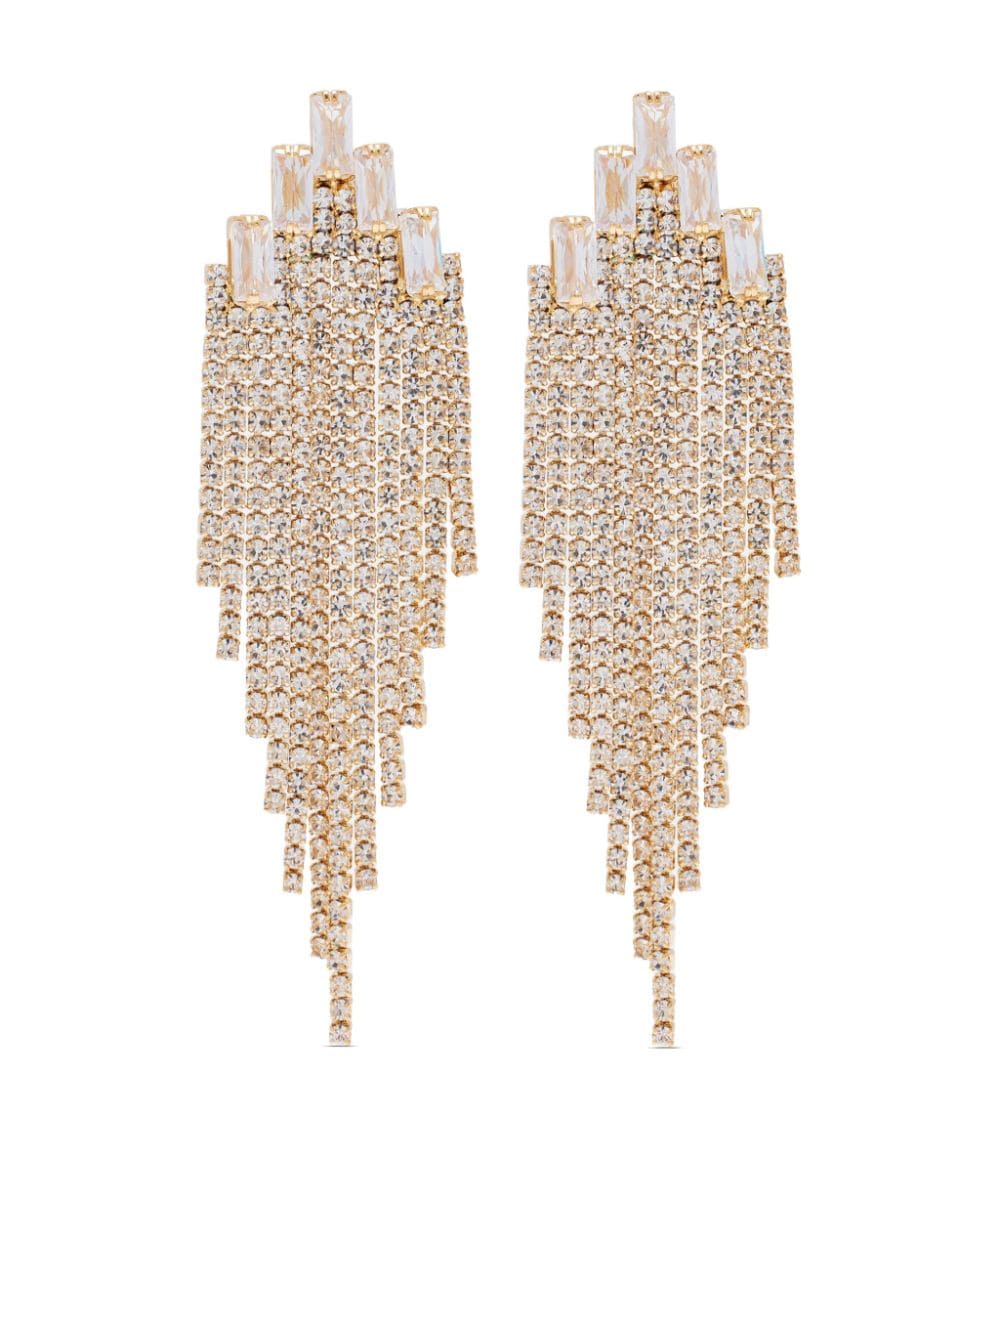 Hzmer Jewelry crystal-embellished drop earrings - Gold von Hzmer Jewelry